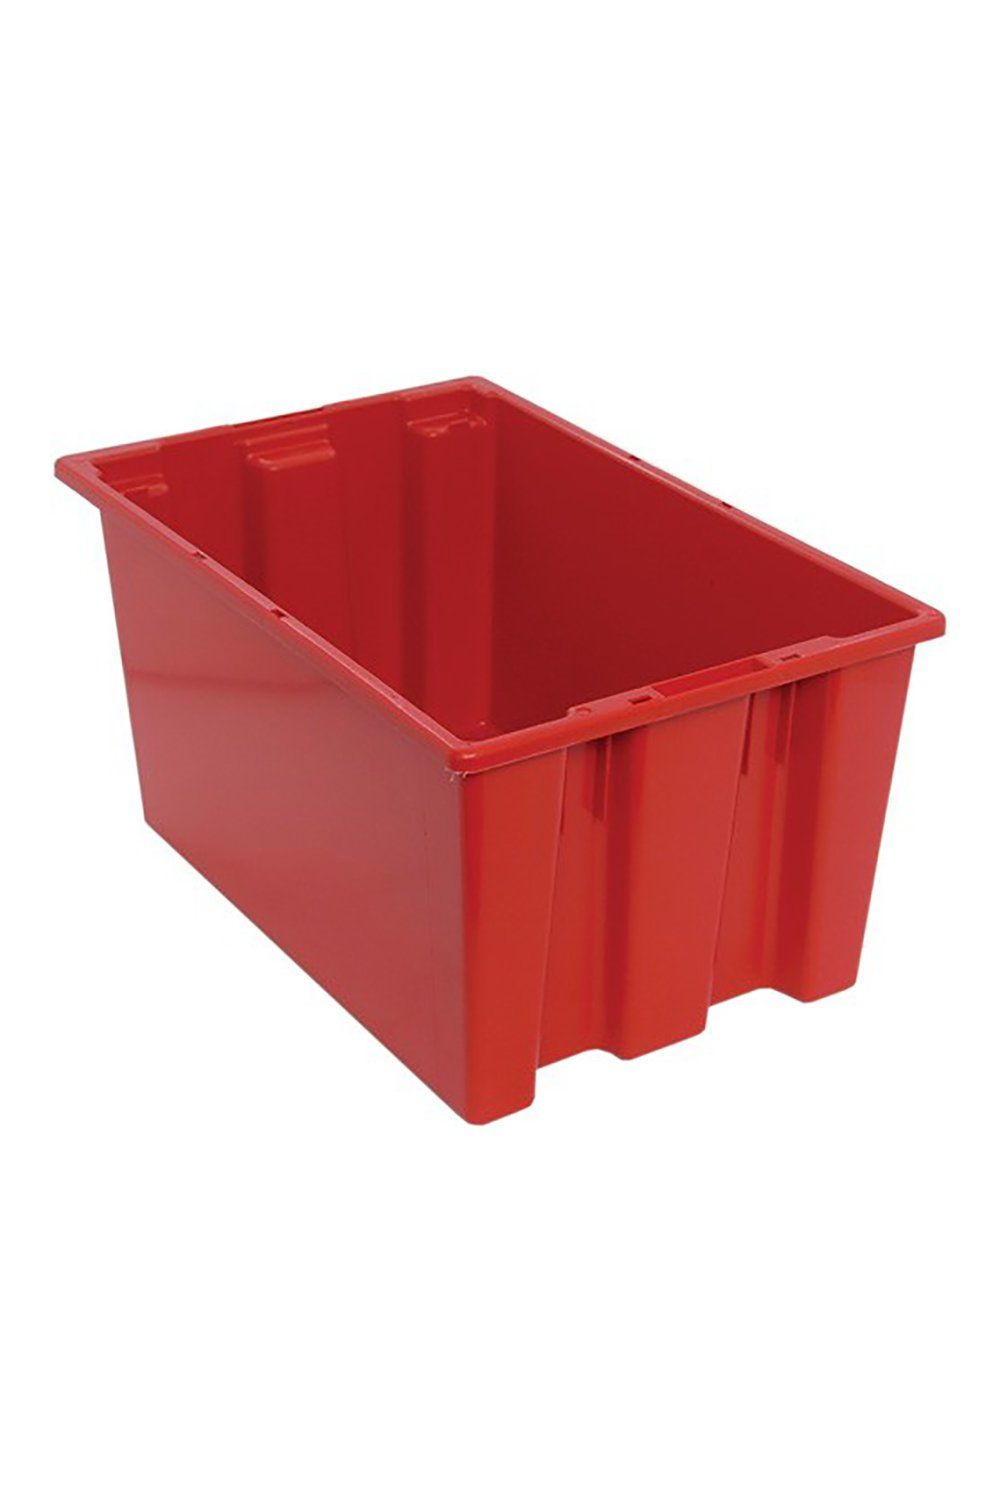 Stack and Nest Tote Bins & Containers Acart 23-1/2"L x 15-1/2"W x 12"H Red 